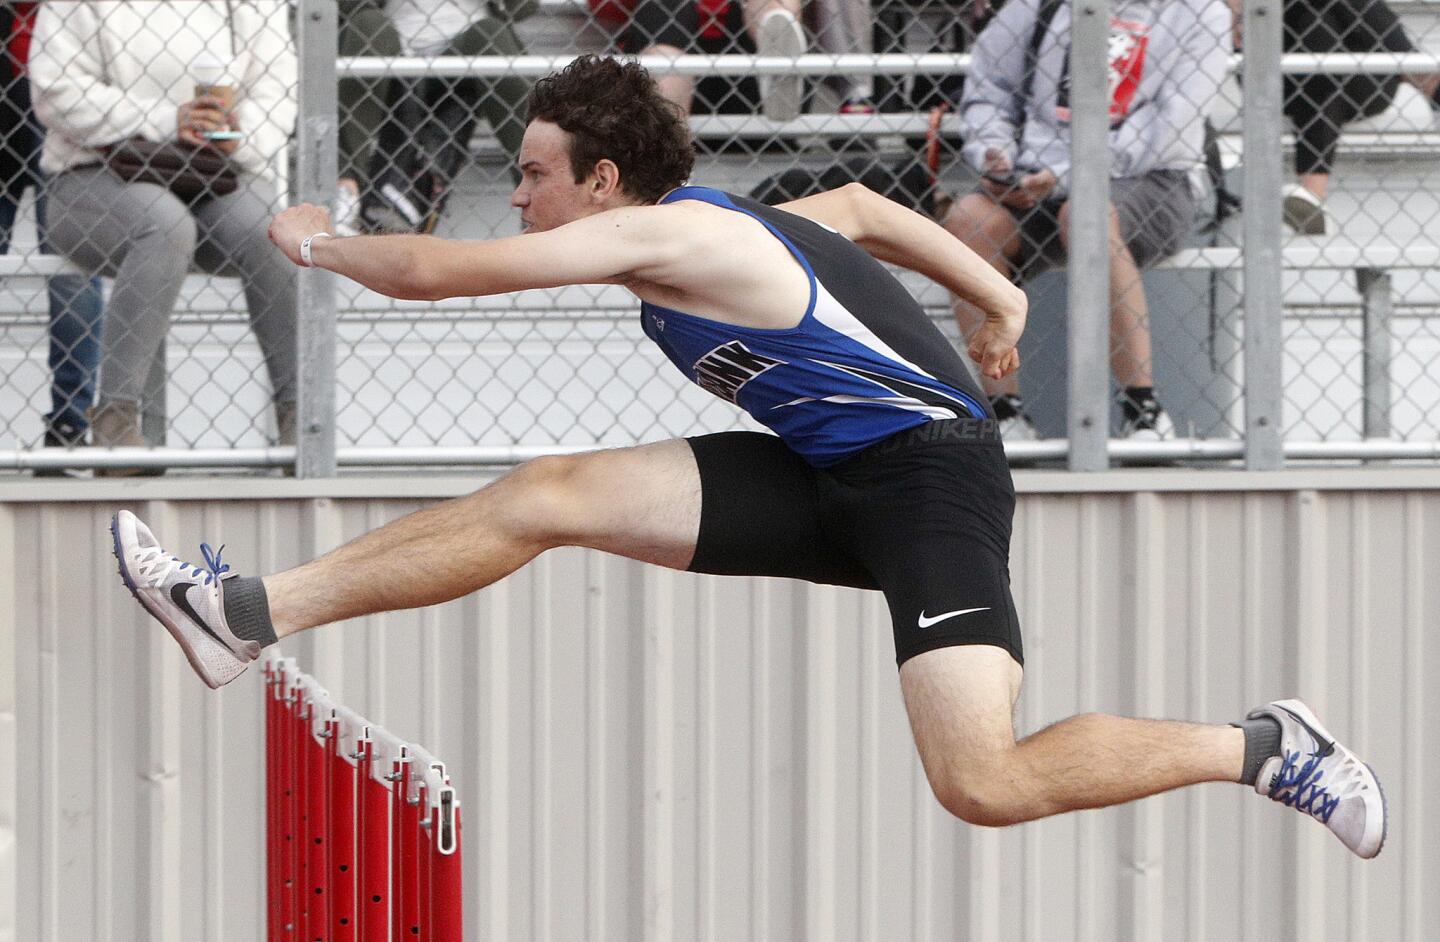 Photo Gallery: Burroughs vs. Burbank in Pacific League track